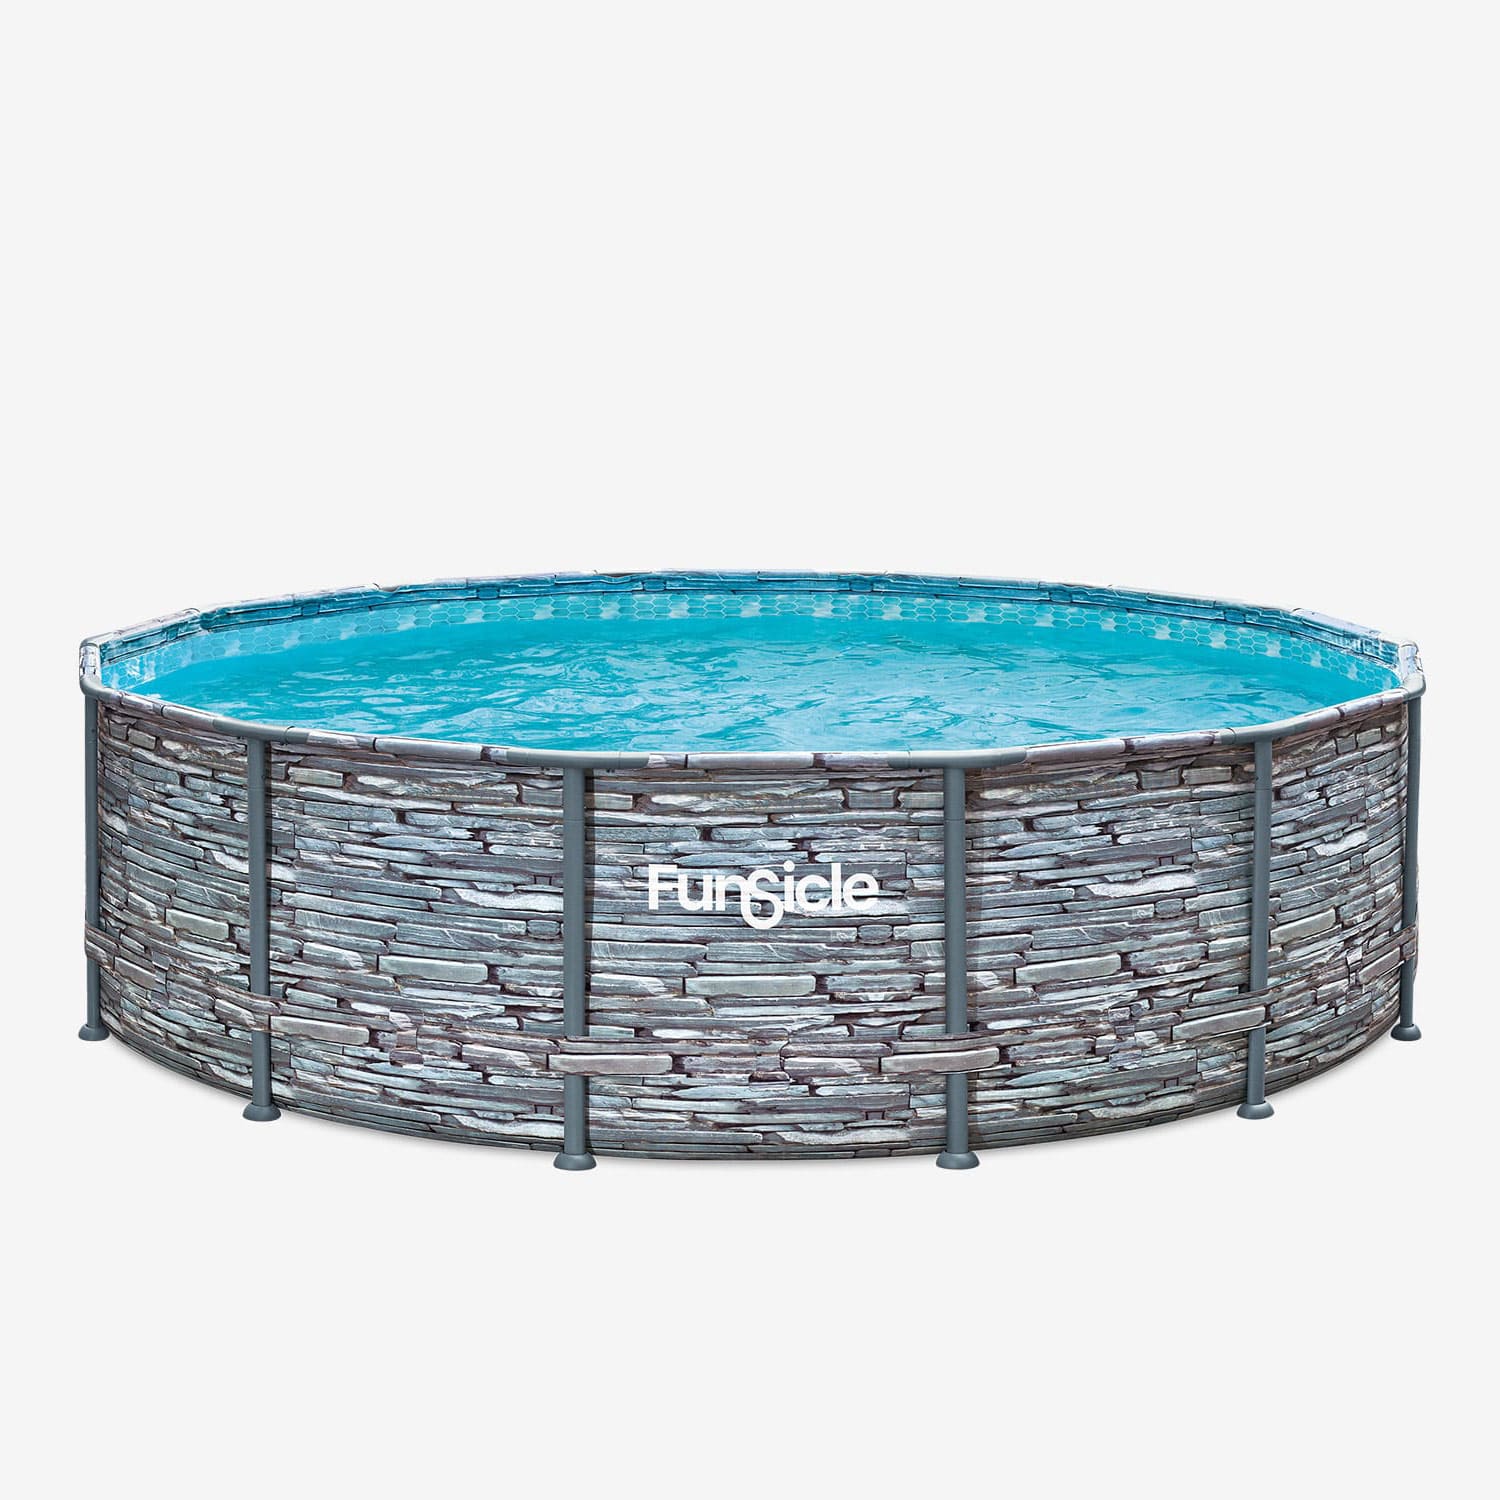 Funsicle 14 ft Oasis Designer Pool - Stone Slate without Pople